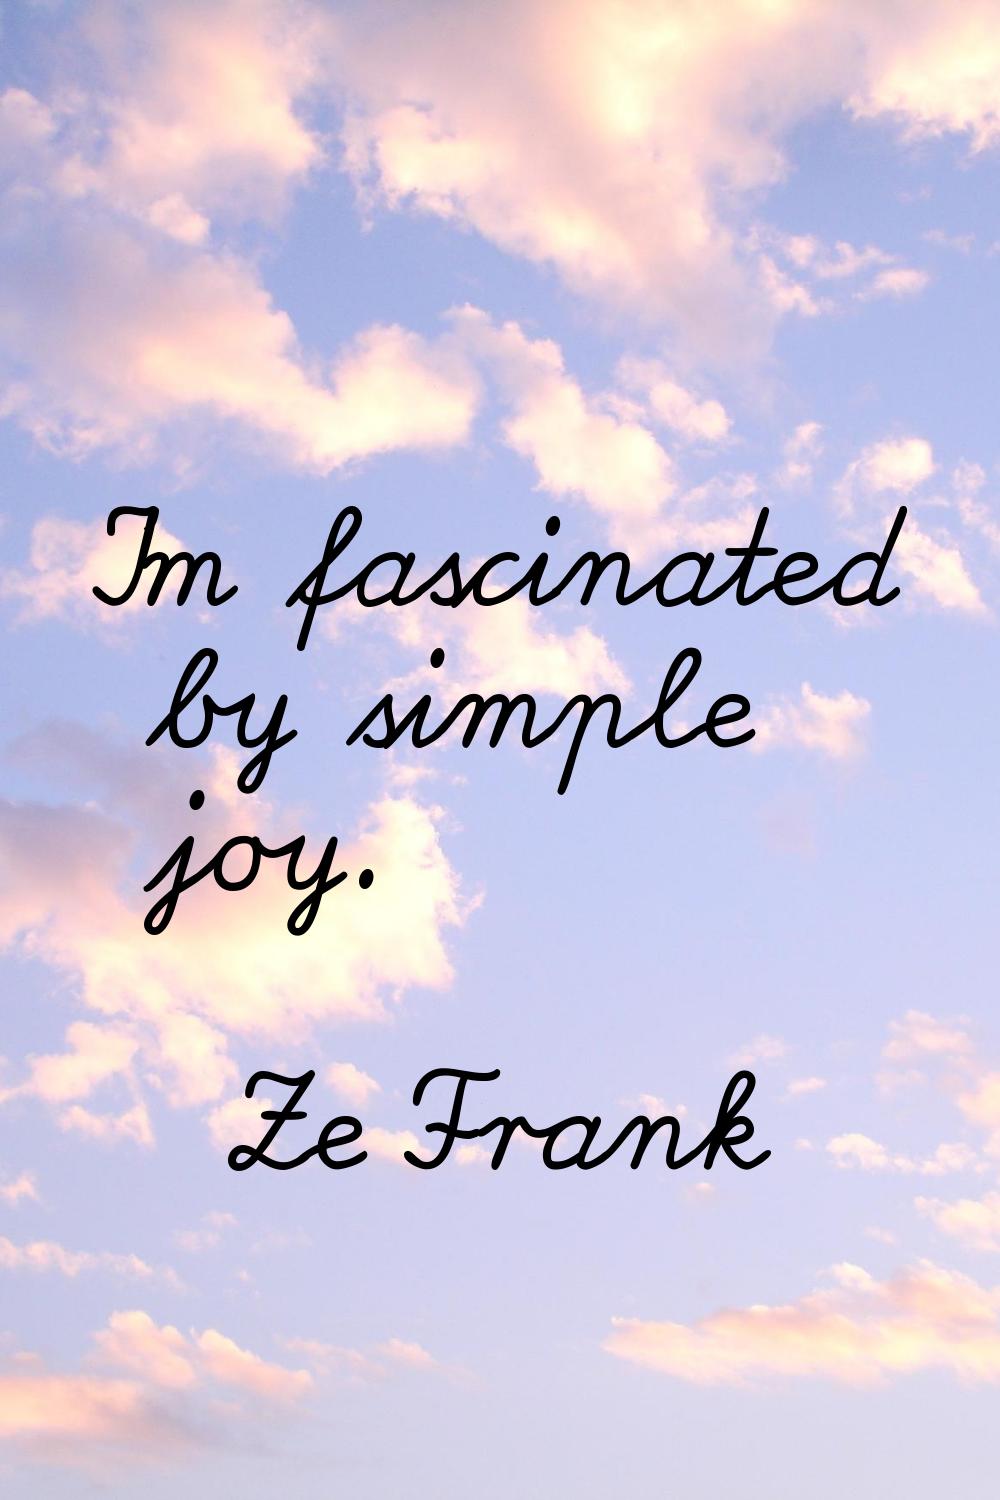 I'm fascinated by simple joy.